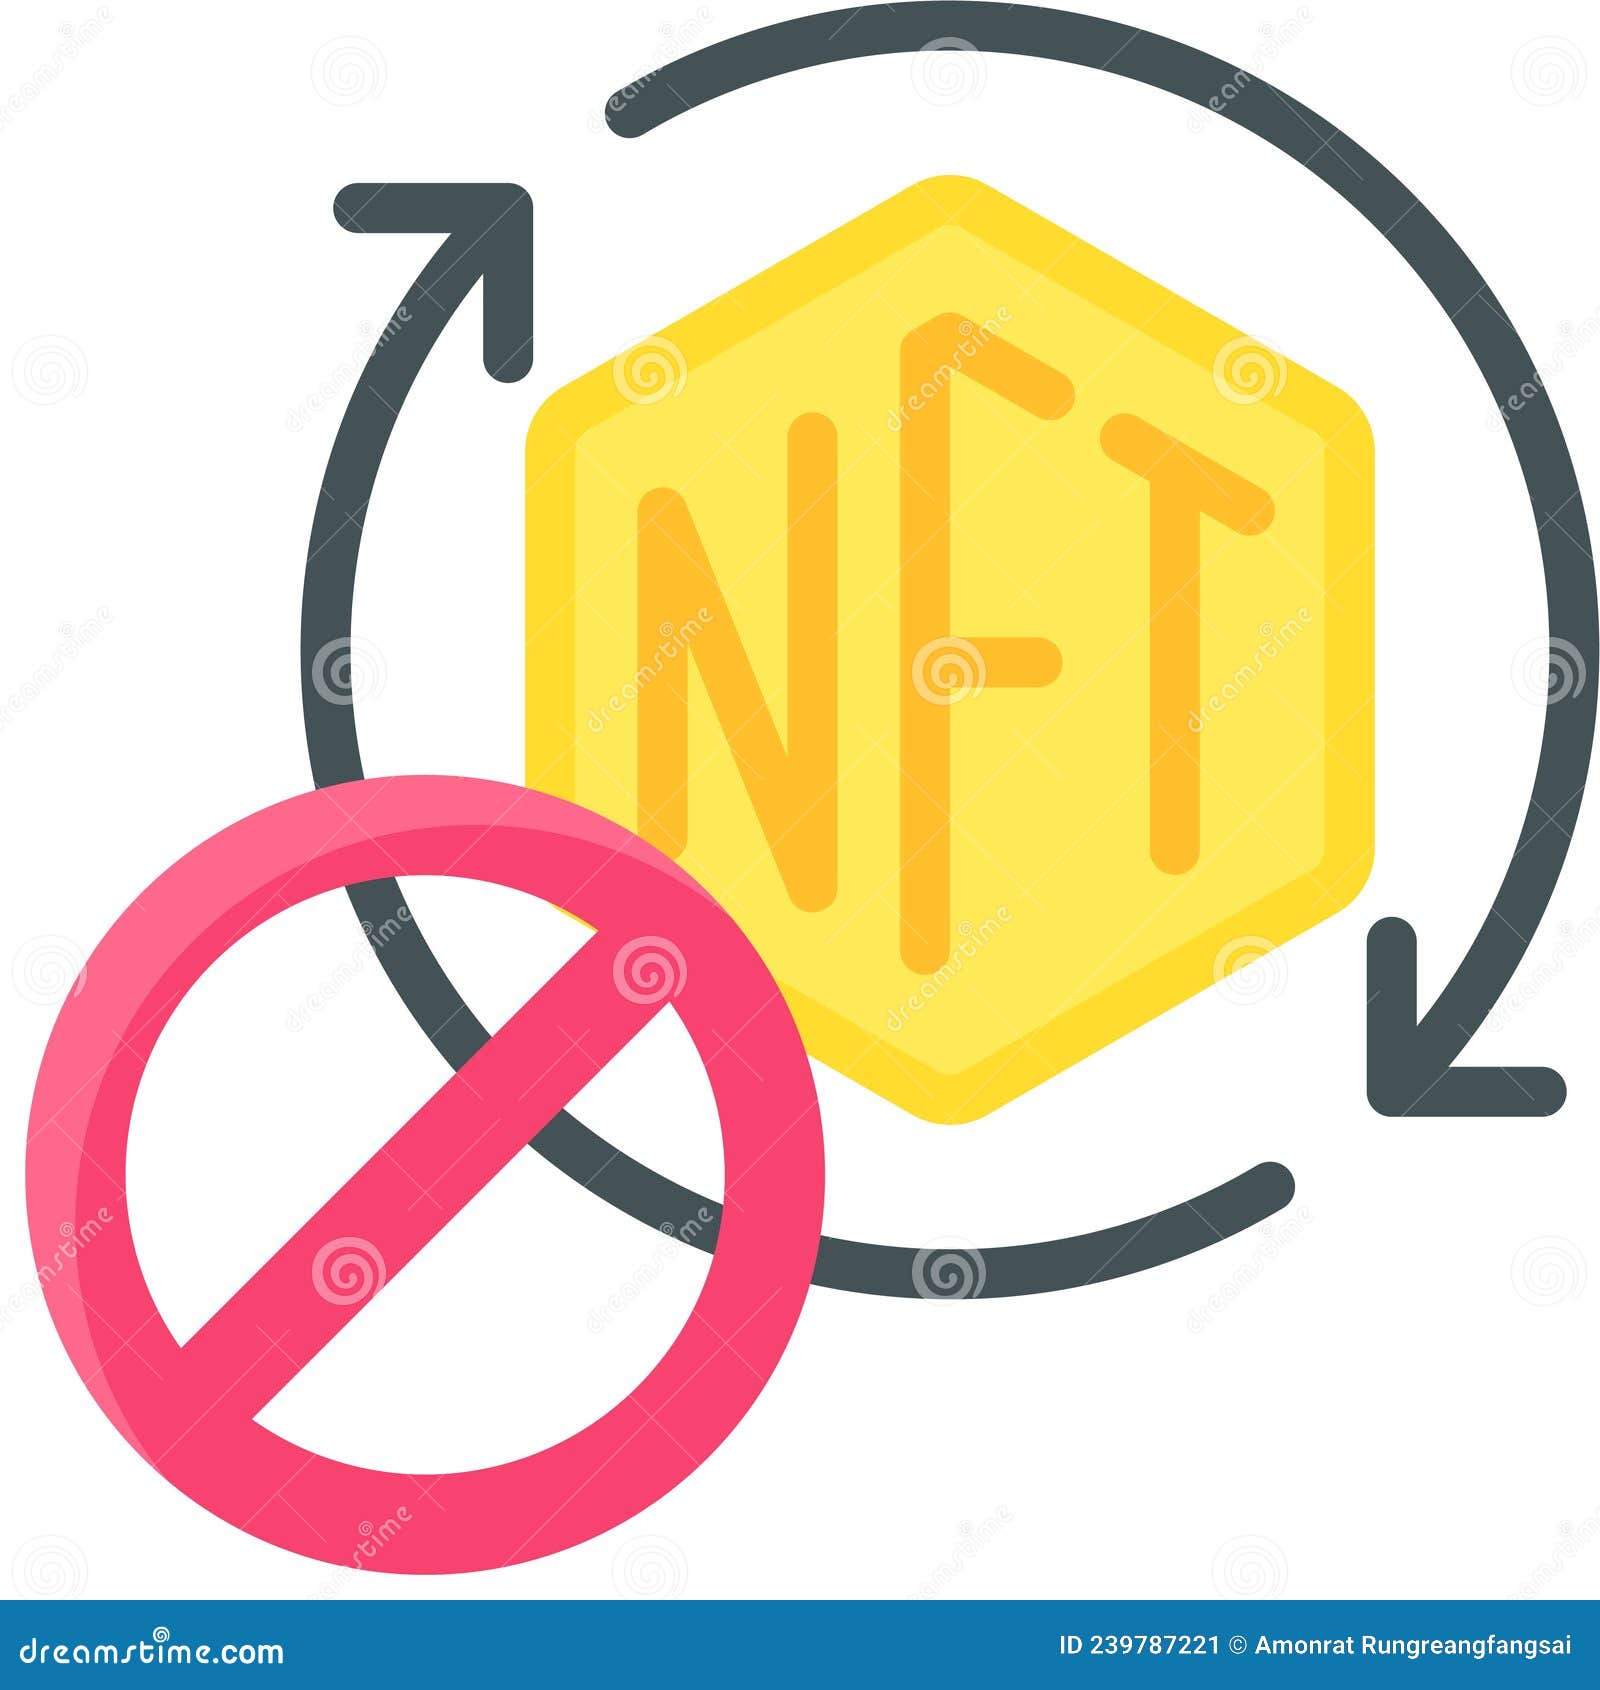 no repeat icon, nft related  